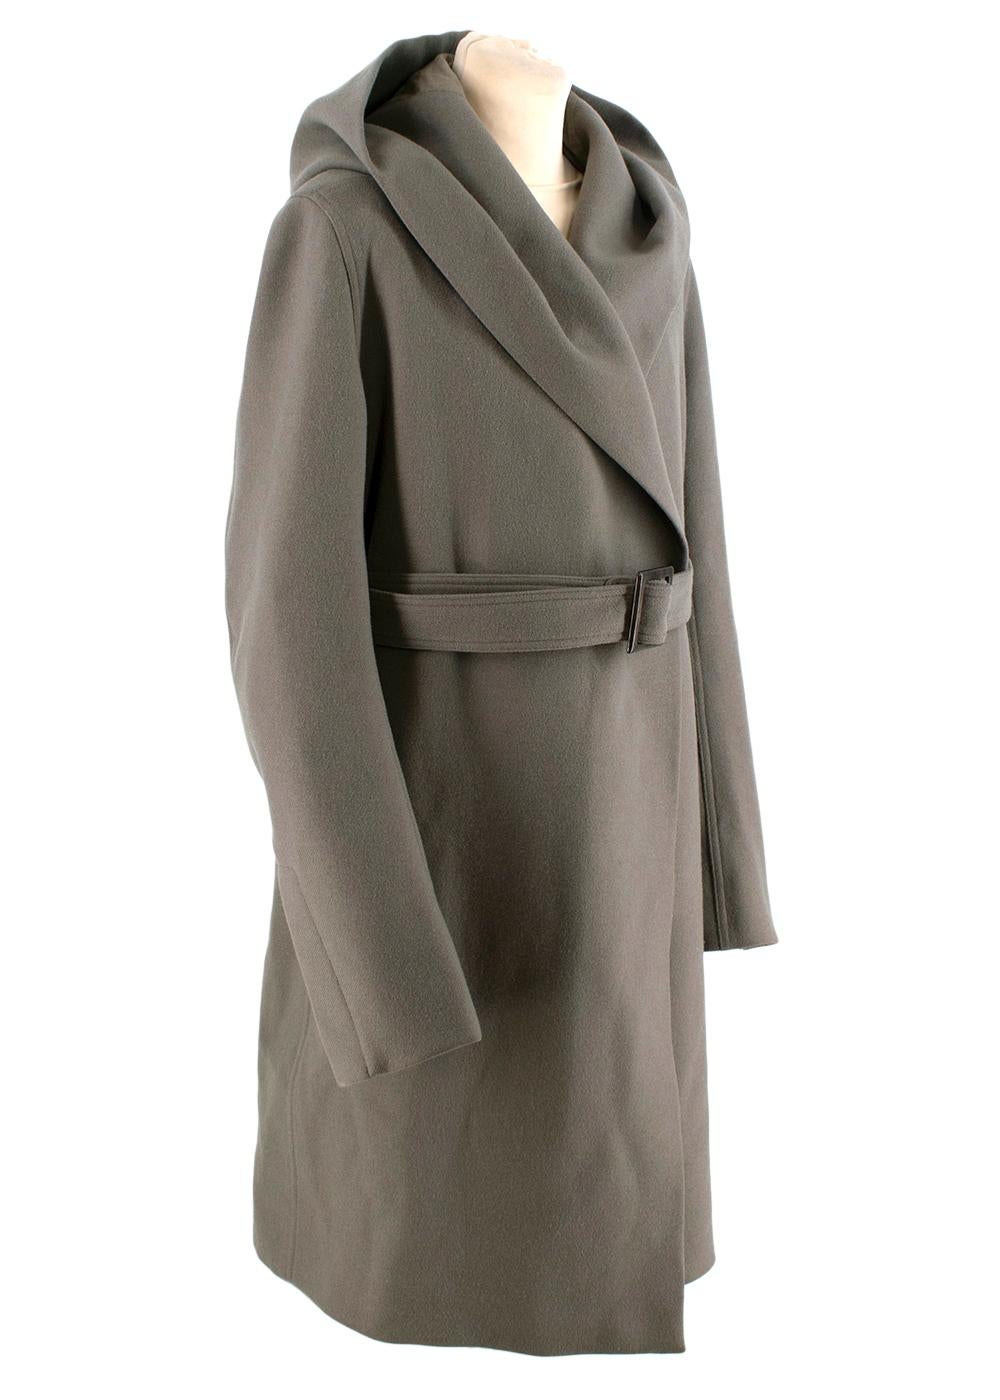 Rick Owens Sage-Grey Shawl Hooded Long Coat 
 

 - Open, wrap-front coat with a shawl,collar hooded coat and oversized silhouette, typical of the brand 
 - Button cuffs
 - Two inset pockets 
 - Belt loops and a belt with a horn buckle 
 - Sage grey